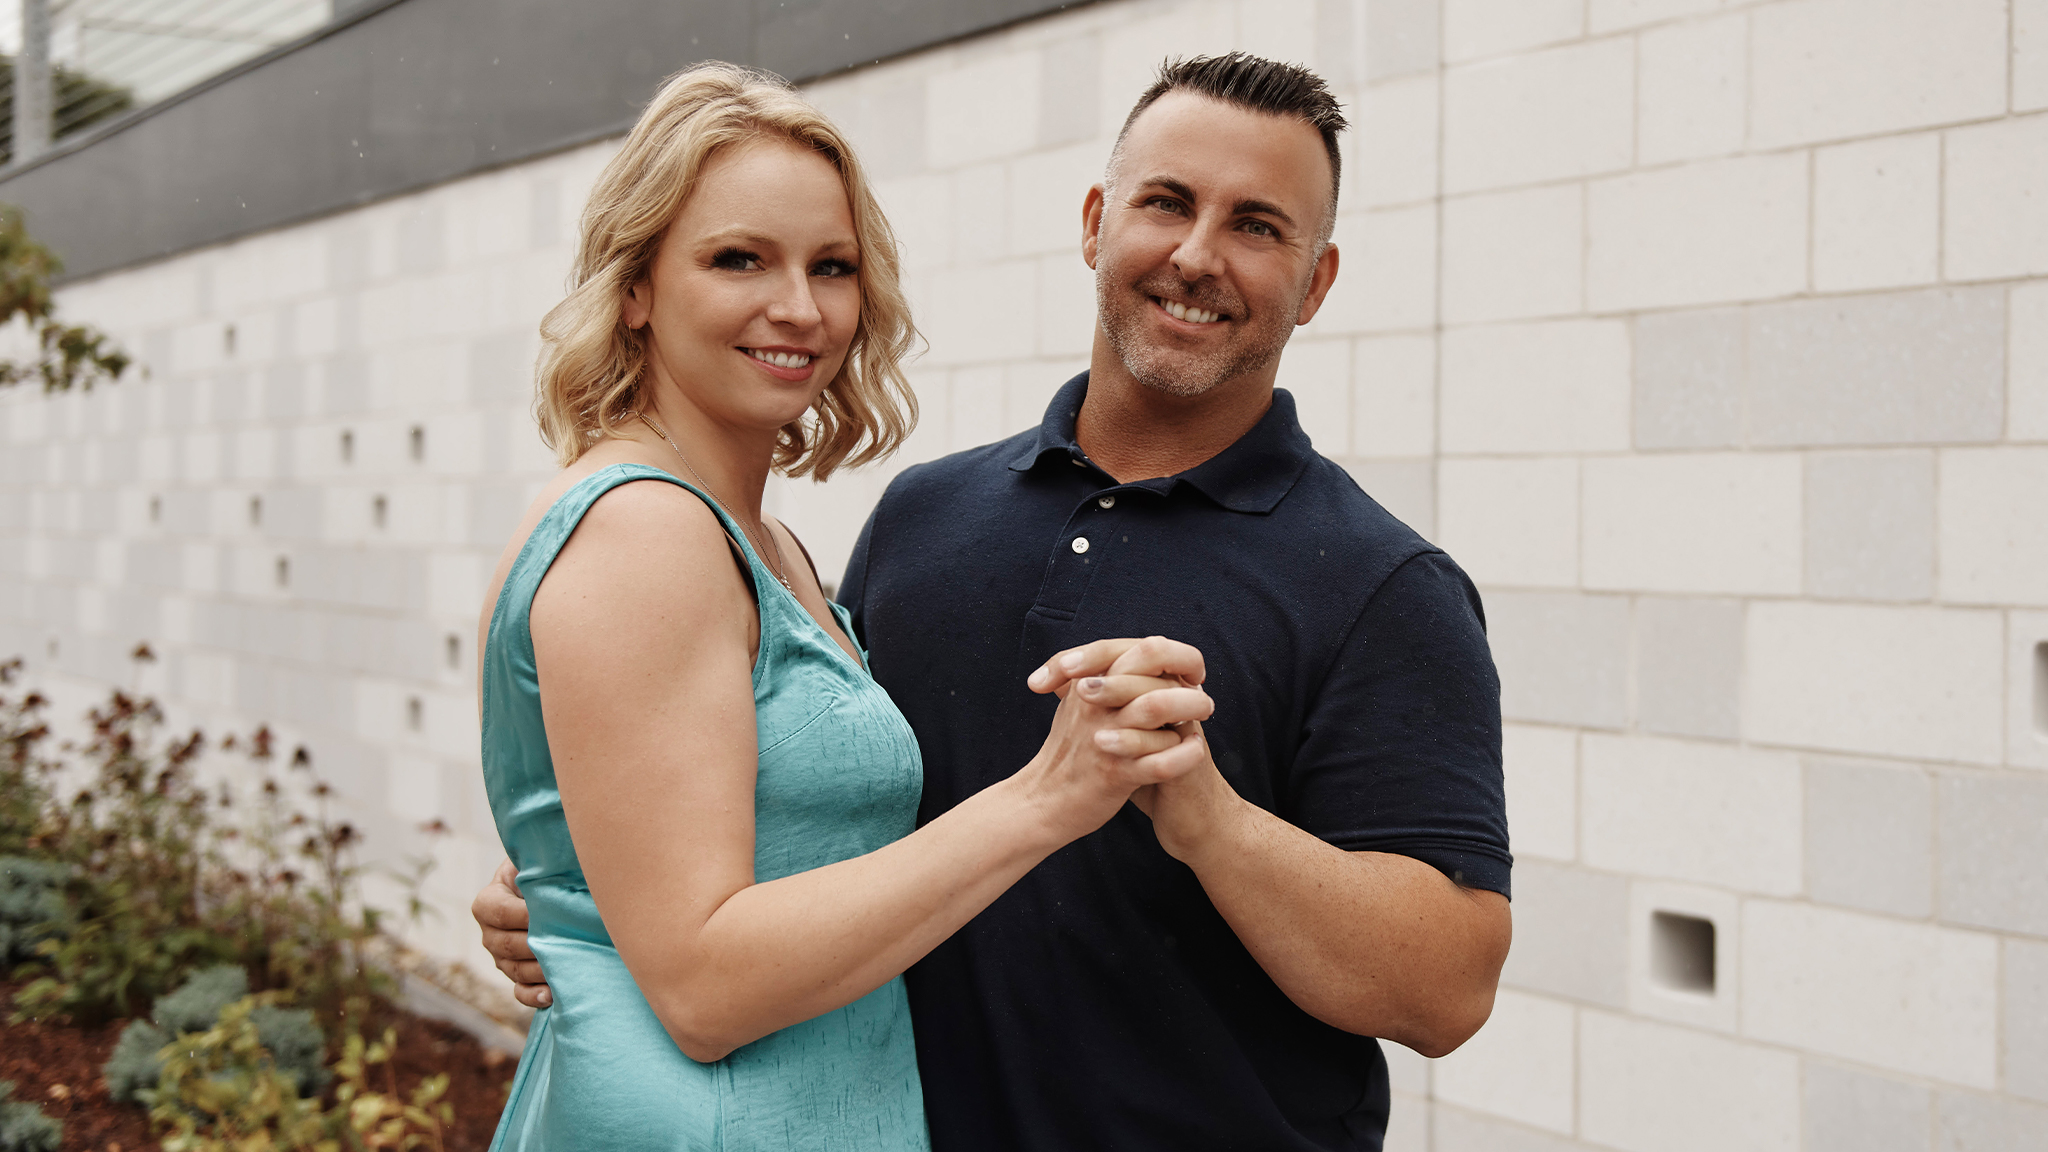 Lindsey & Mark - Married at First Sight Cast | Lifetime